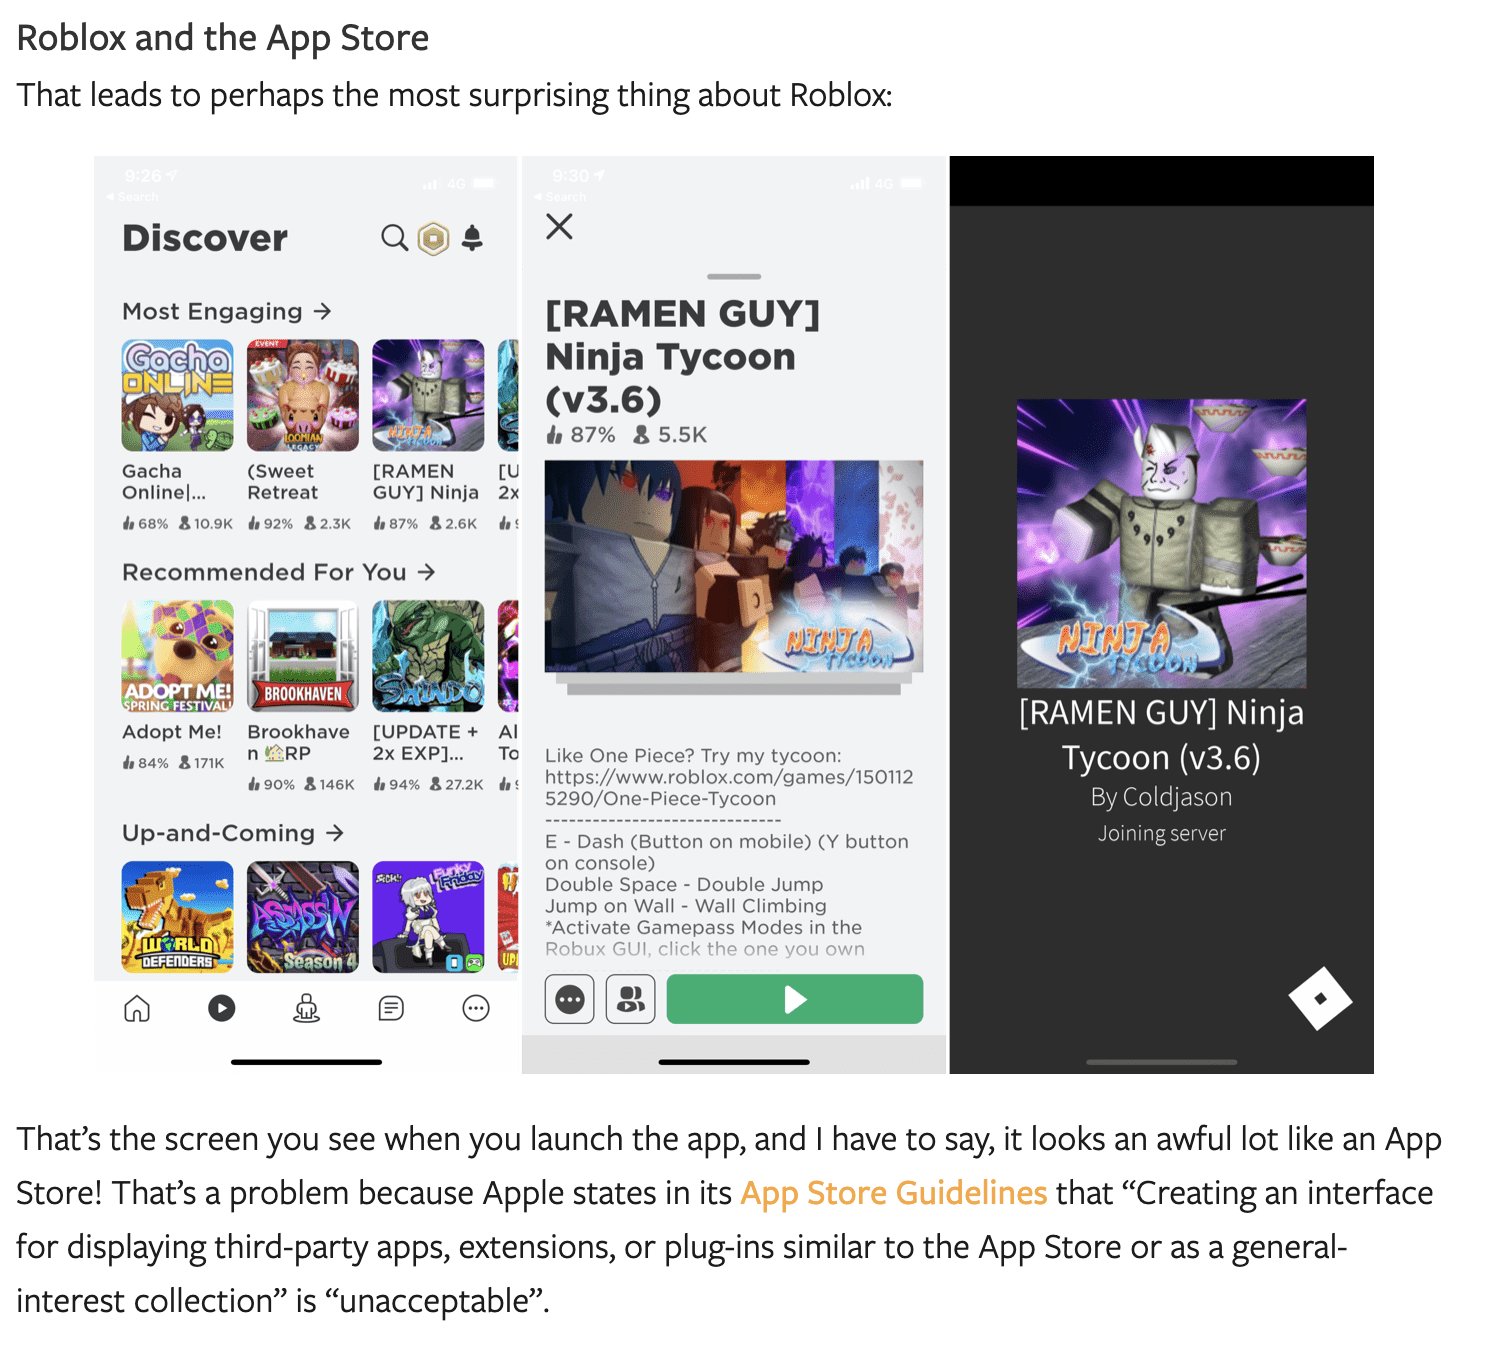 Francois Laberge On Twitter People May Have Noticed This Already In The Stratechery Article On Roblox See Attached But Apple Allows Roblox An App Store In Their Ios App And None Of - double jump gamepass roblox